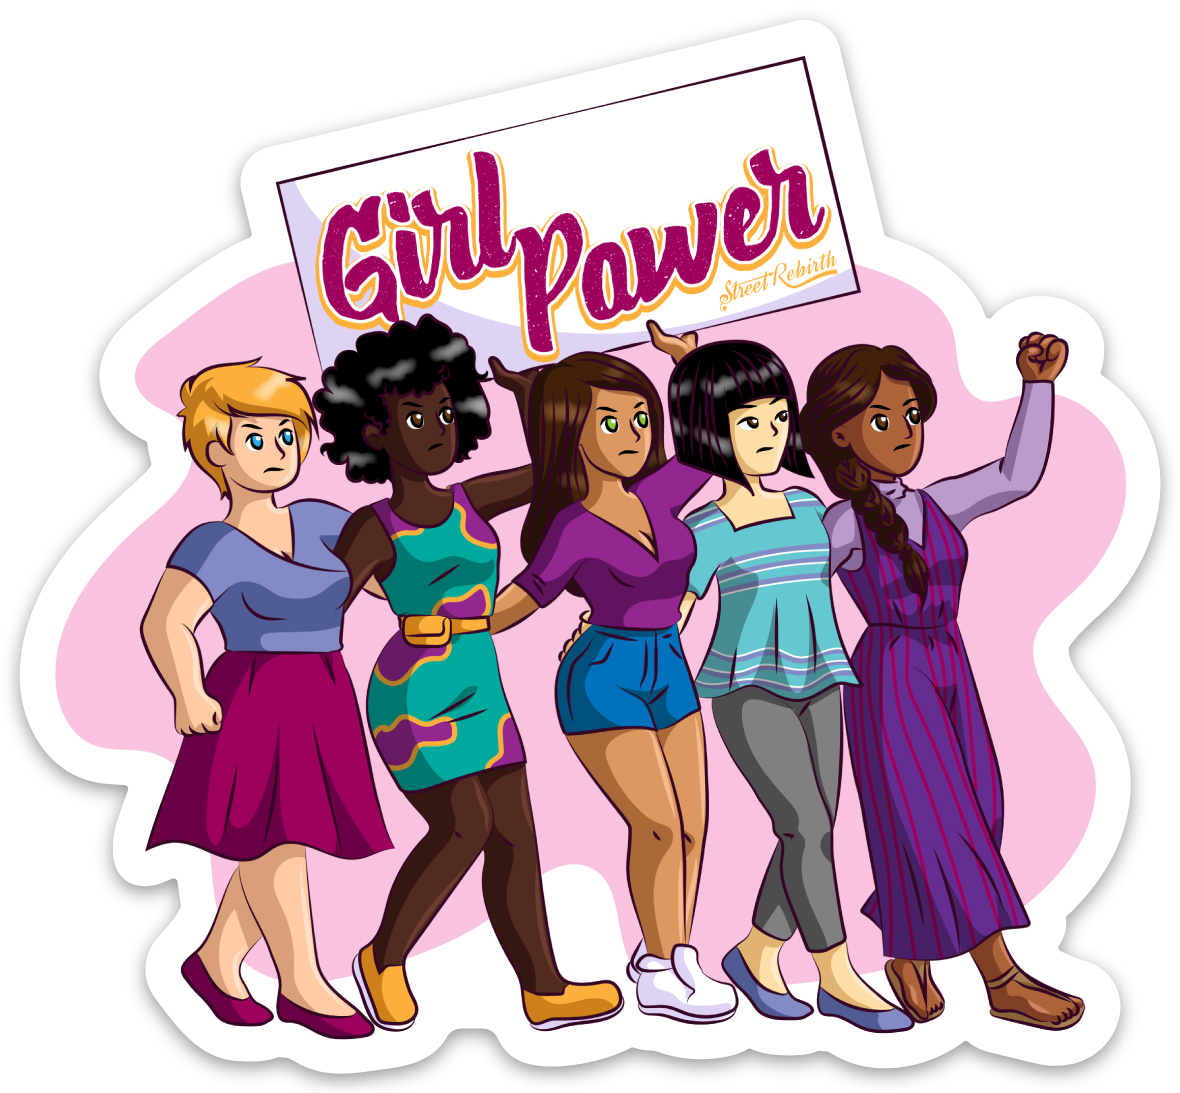 Girl Power PUN STICKER – ONE 4 INCH WATER PROOF VINYL STICKER – FOR HYDRO FLASK, SKATEBOARD, LAPTOP, PLANNER, CAR, COLLECTING, GIFTING